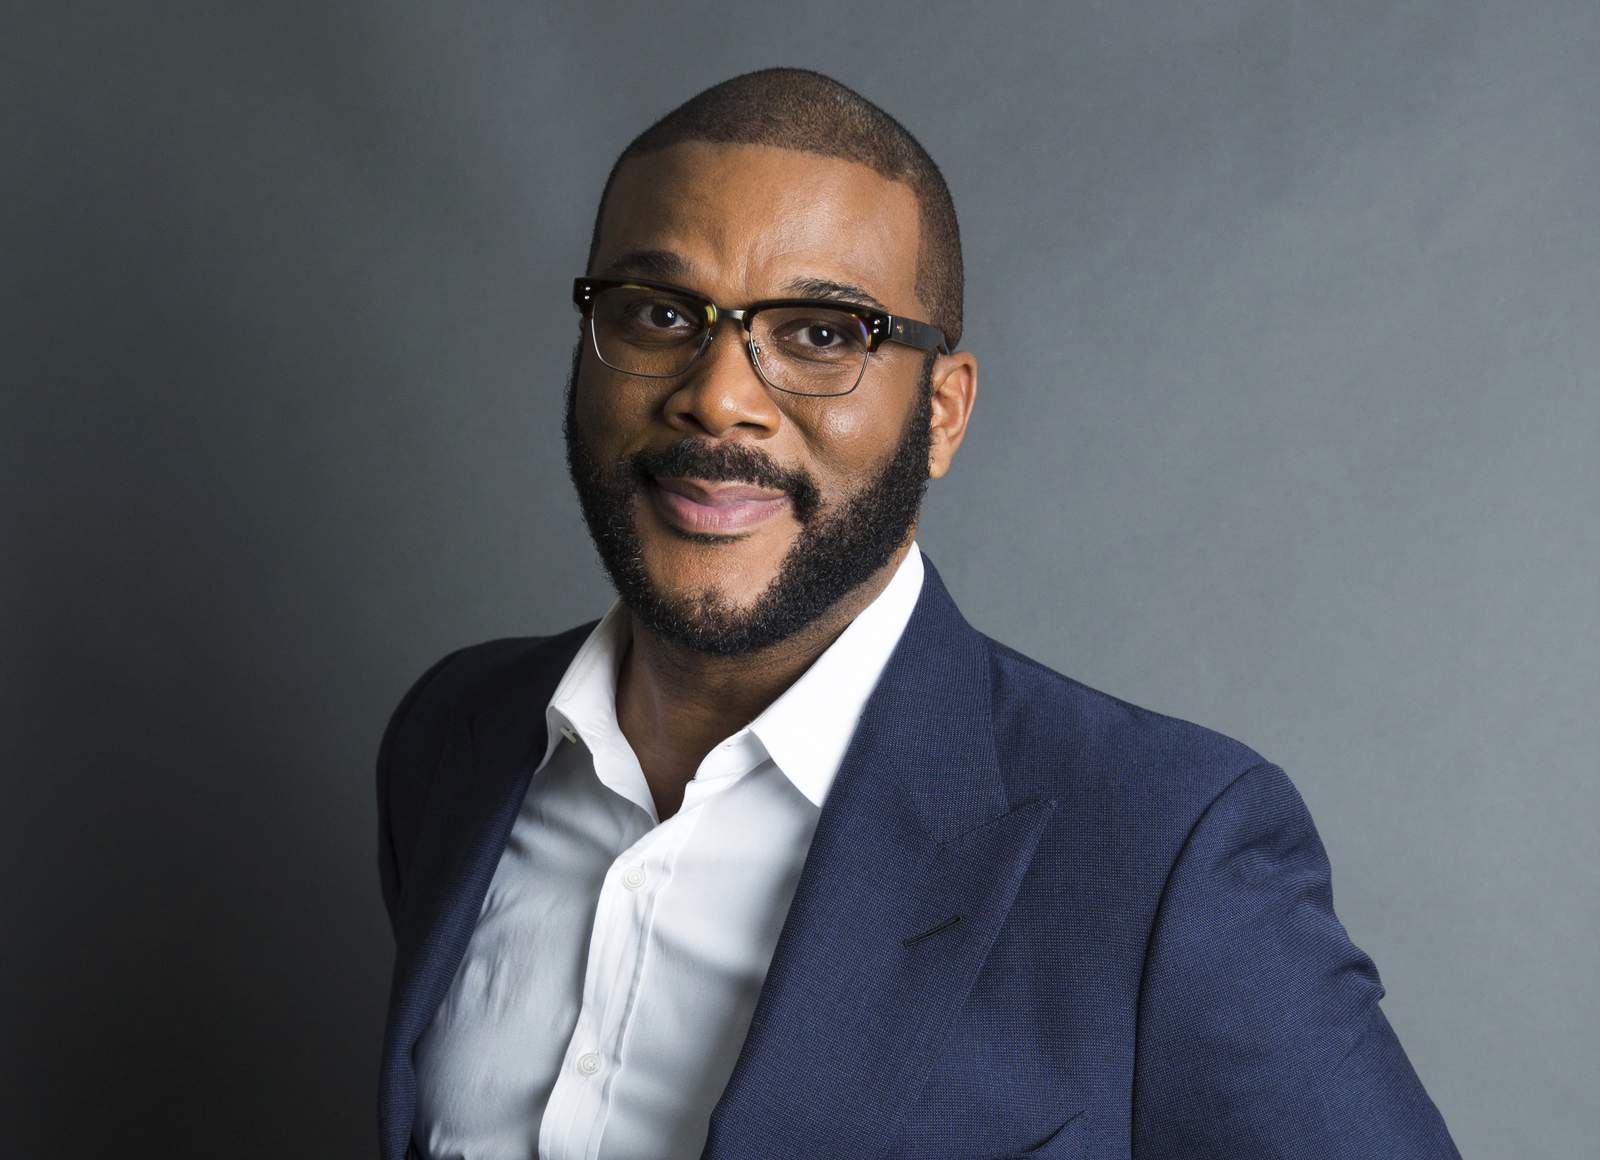 Tyler Perry's work honored with 2020 Governors Award